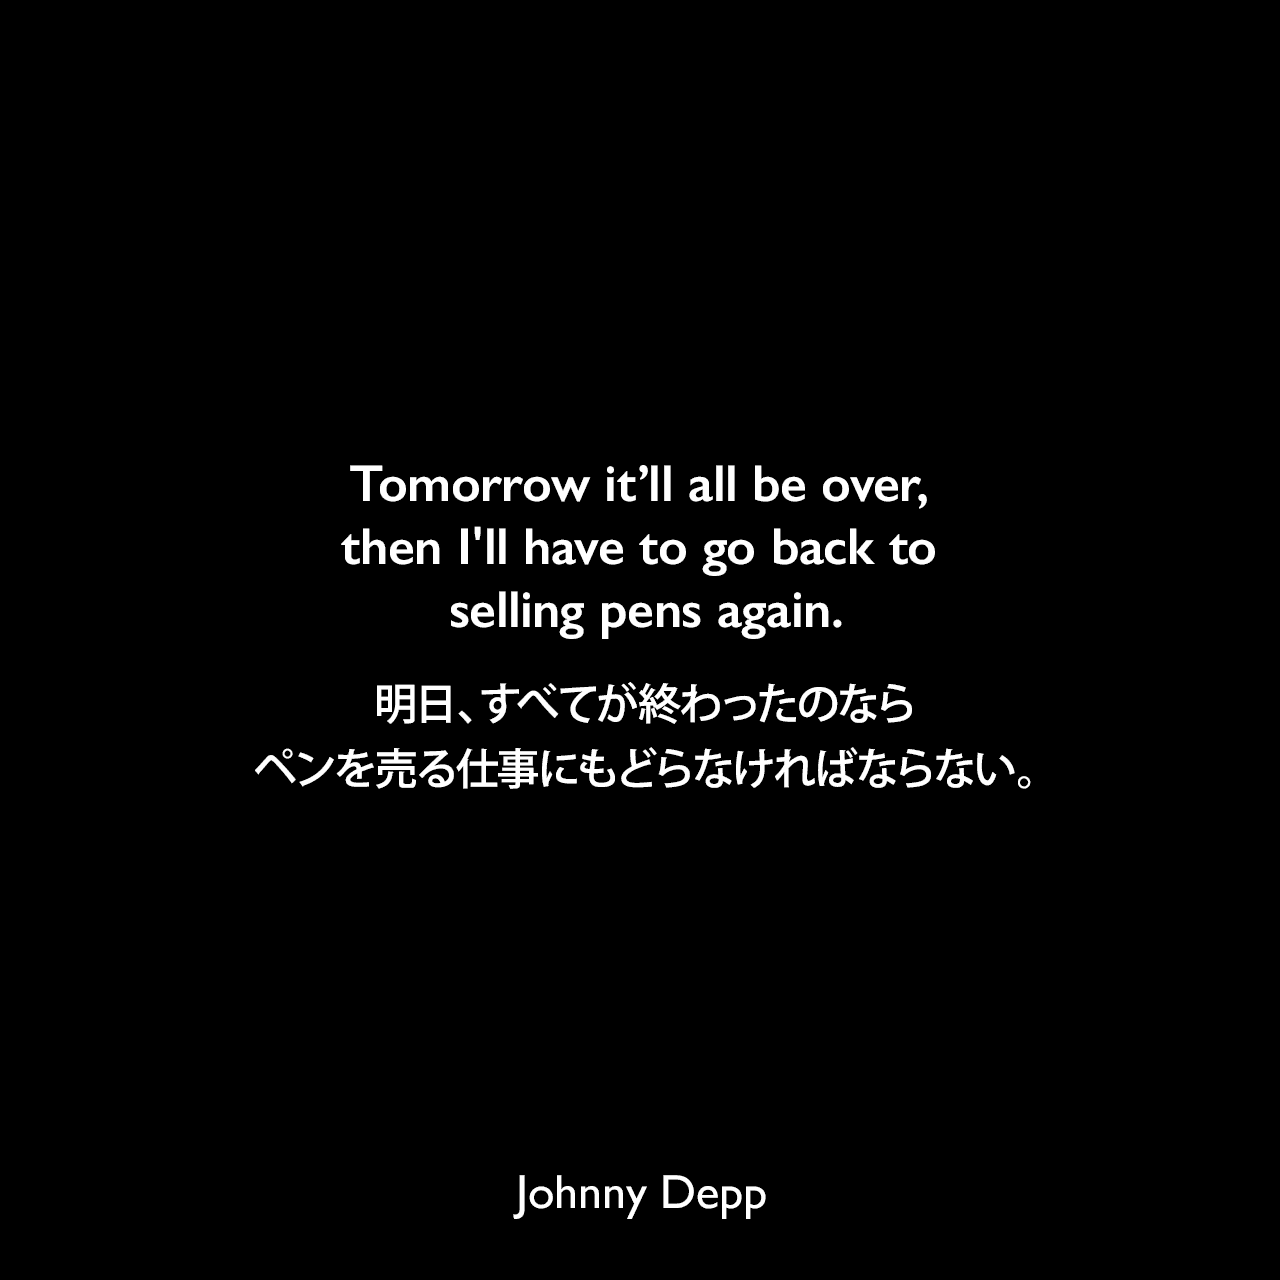 Tomorrow it’ll all be over, then I'll have to go back to selling pens again.明日、すべてが終わったのなら、ペンを売る仕事にもどらなければならない。Johnny Depp